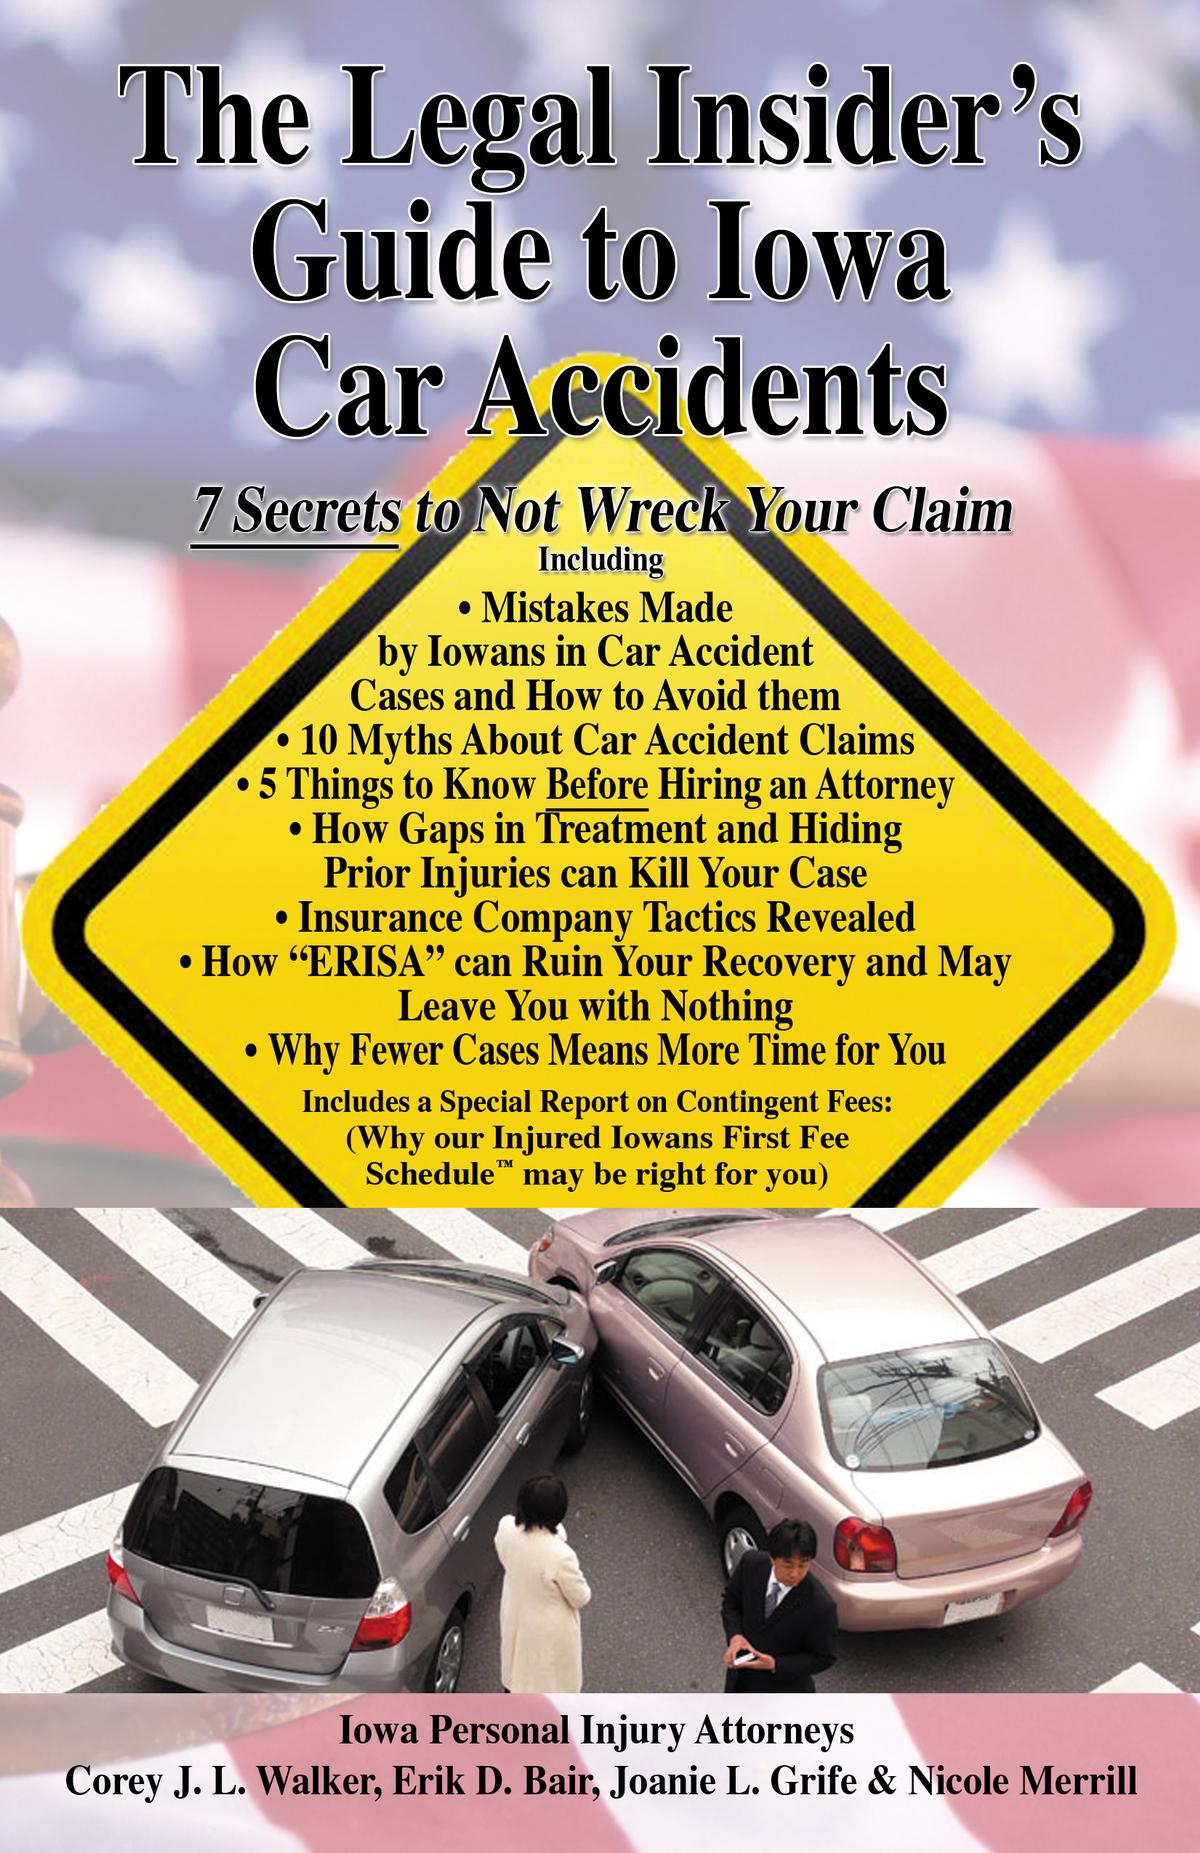 The Legal Insider’s Guide to Iowa Car Accidents